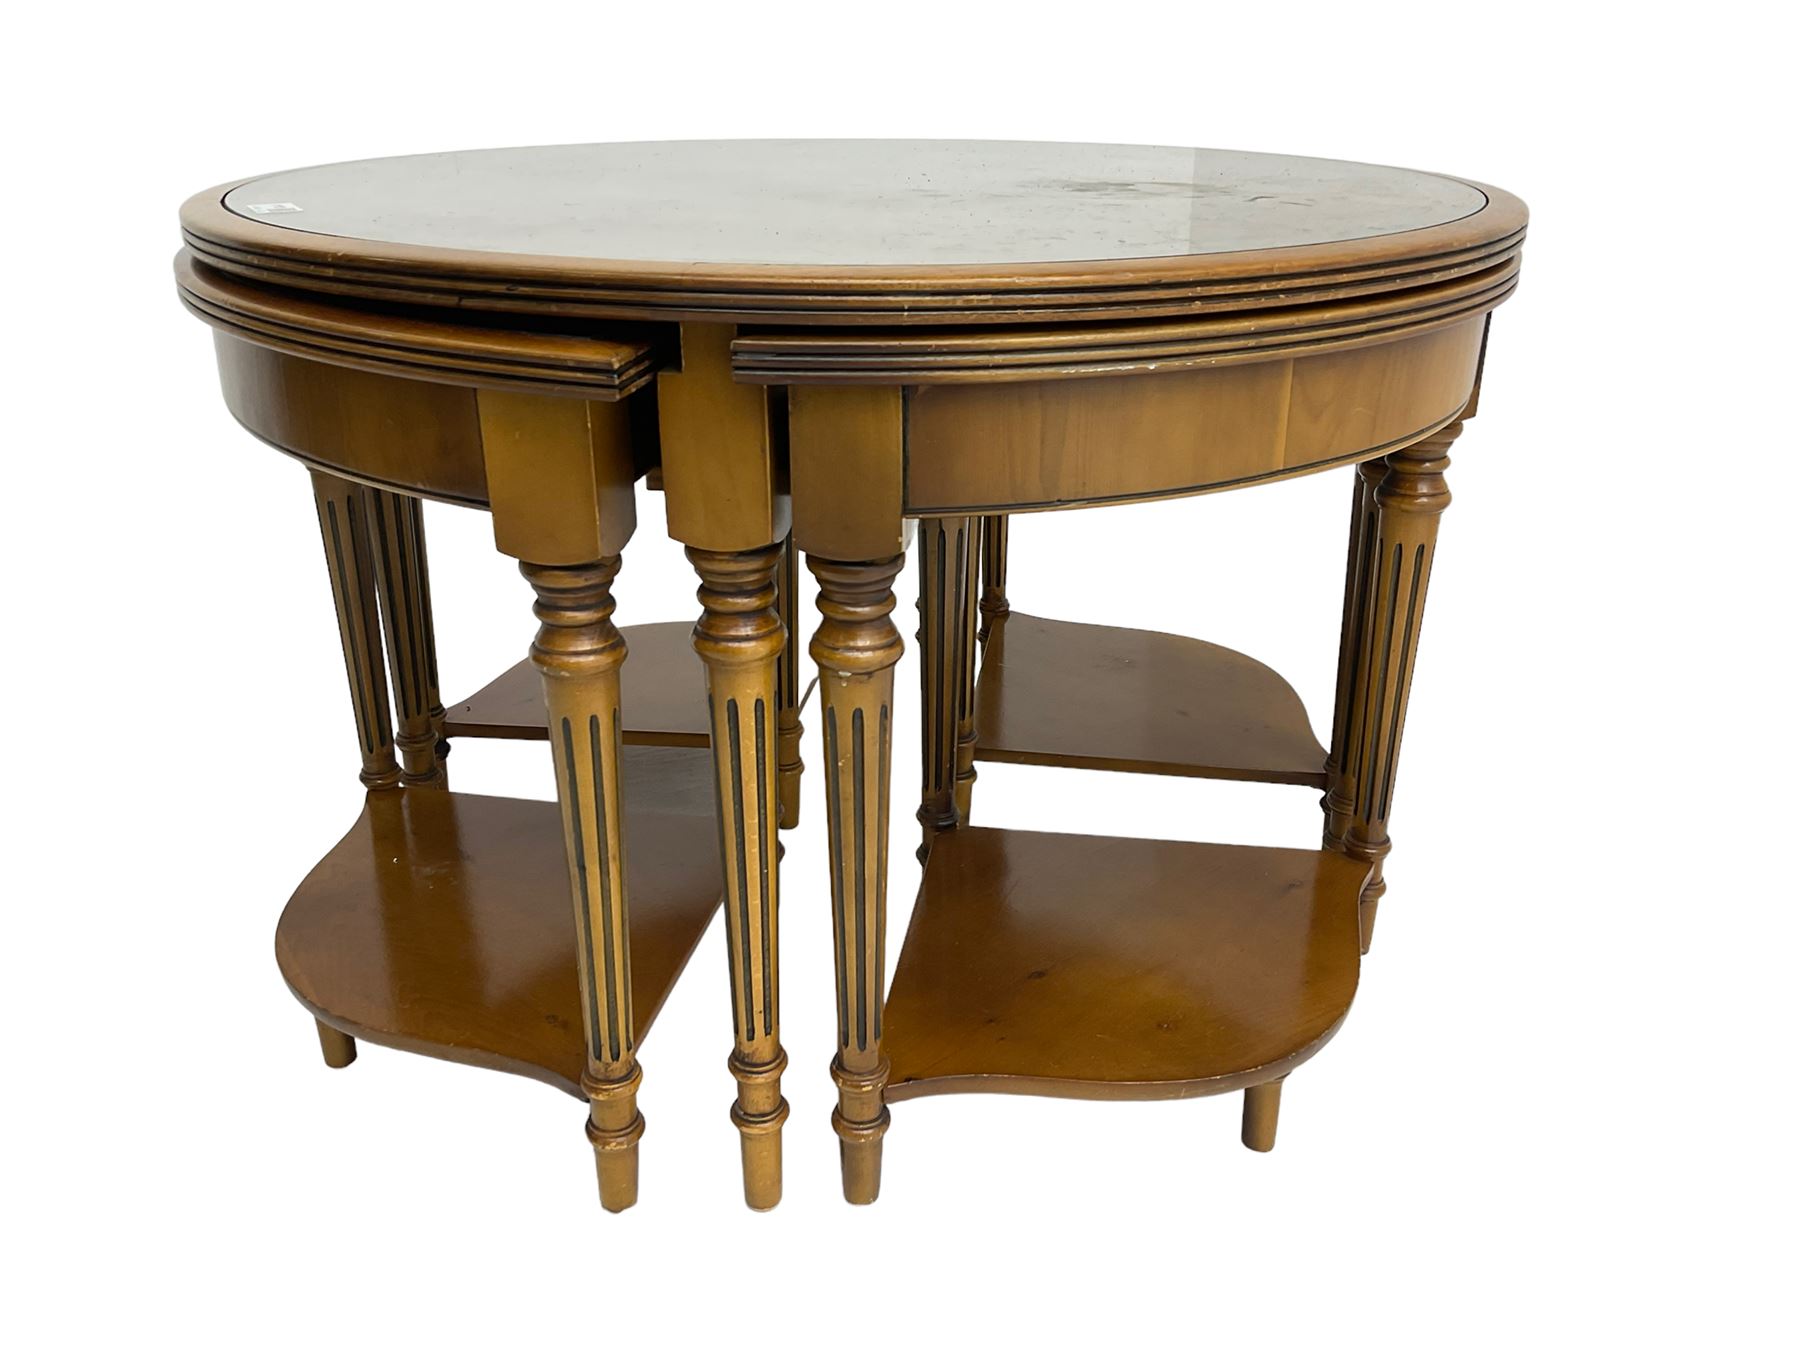 Yew wood circular coffee table with four nesting tables - Image 5 of 5